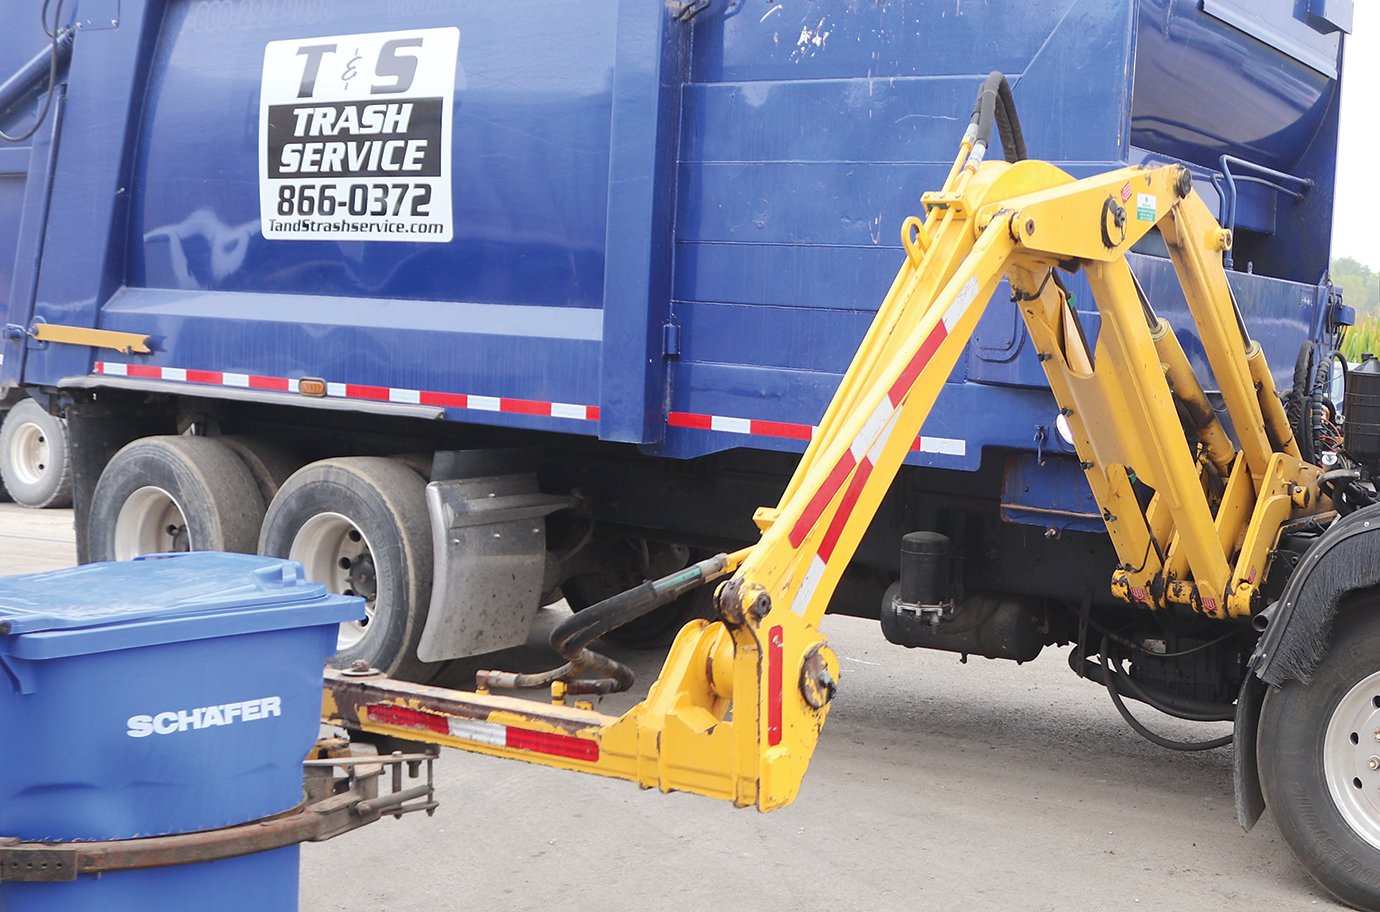 A fully-automated arm attached to a new T&S Trash Service truck performs its duties Thursday.